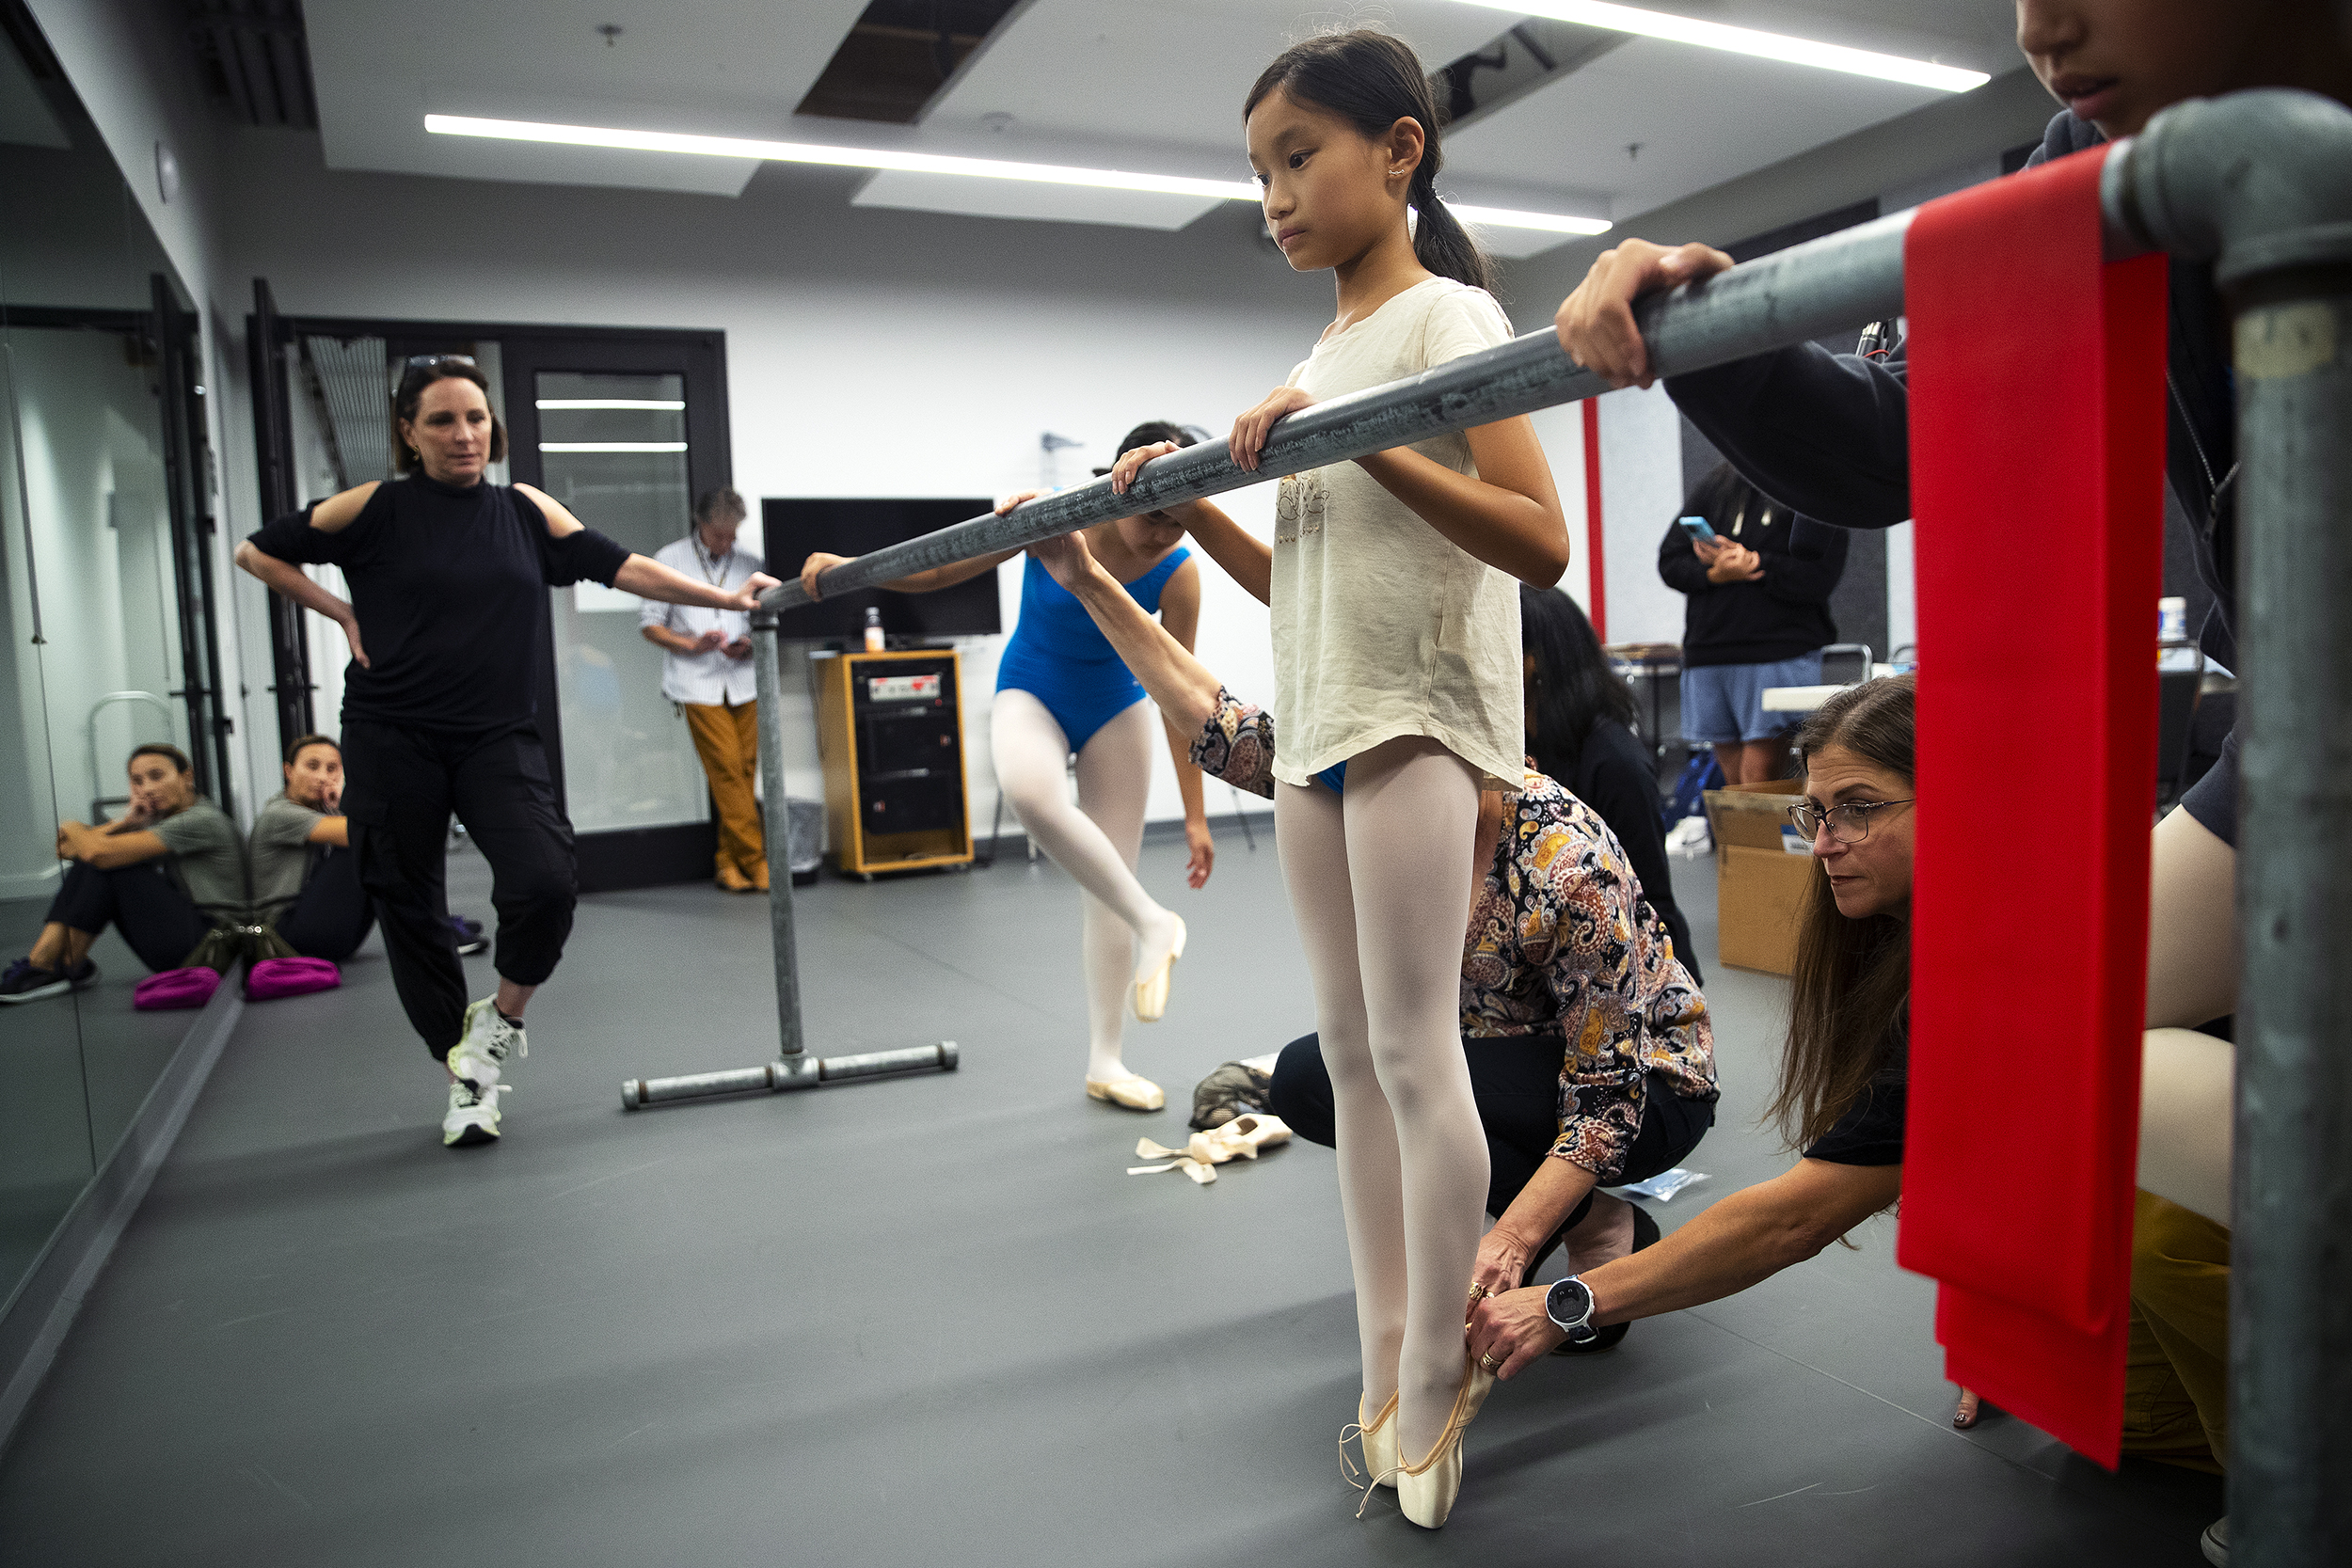 KUOW - For these Pacific Northwest ballerinas, getting 'en pointe